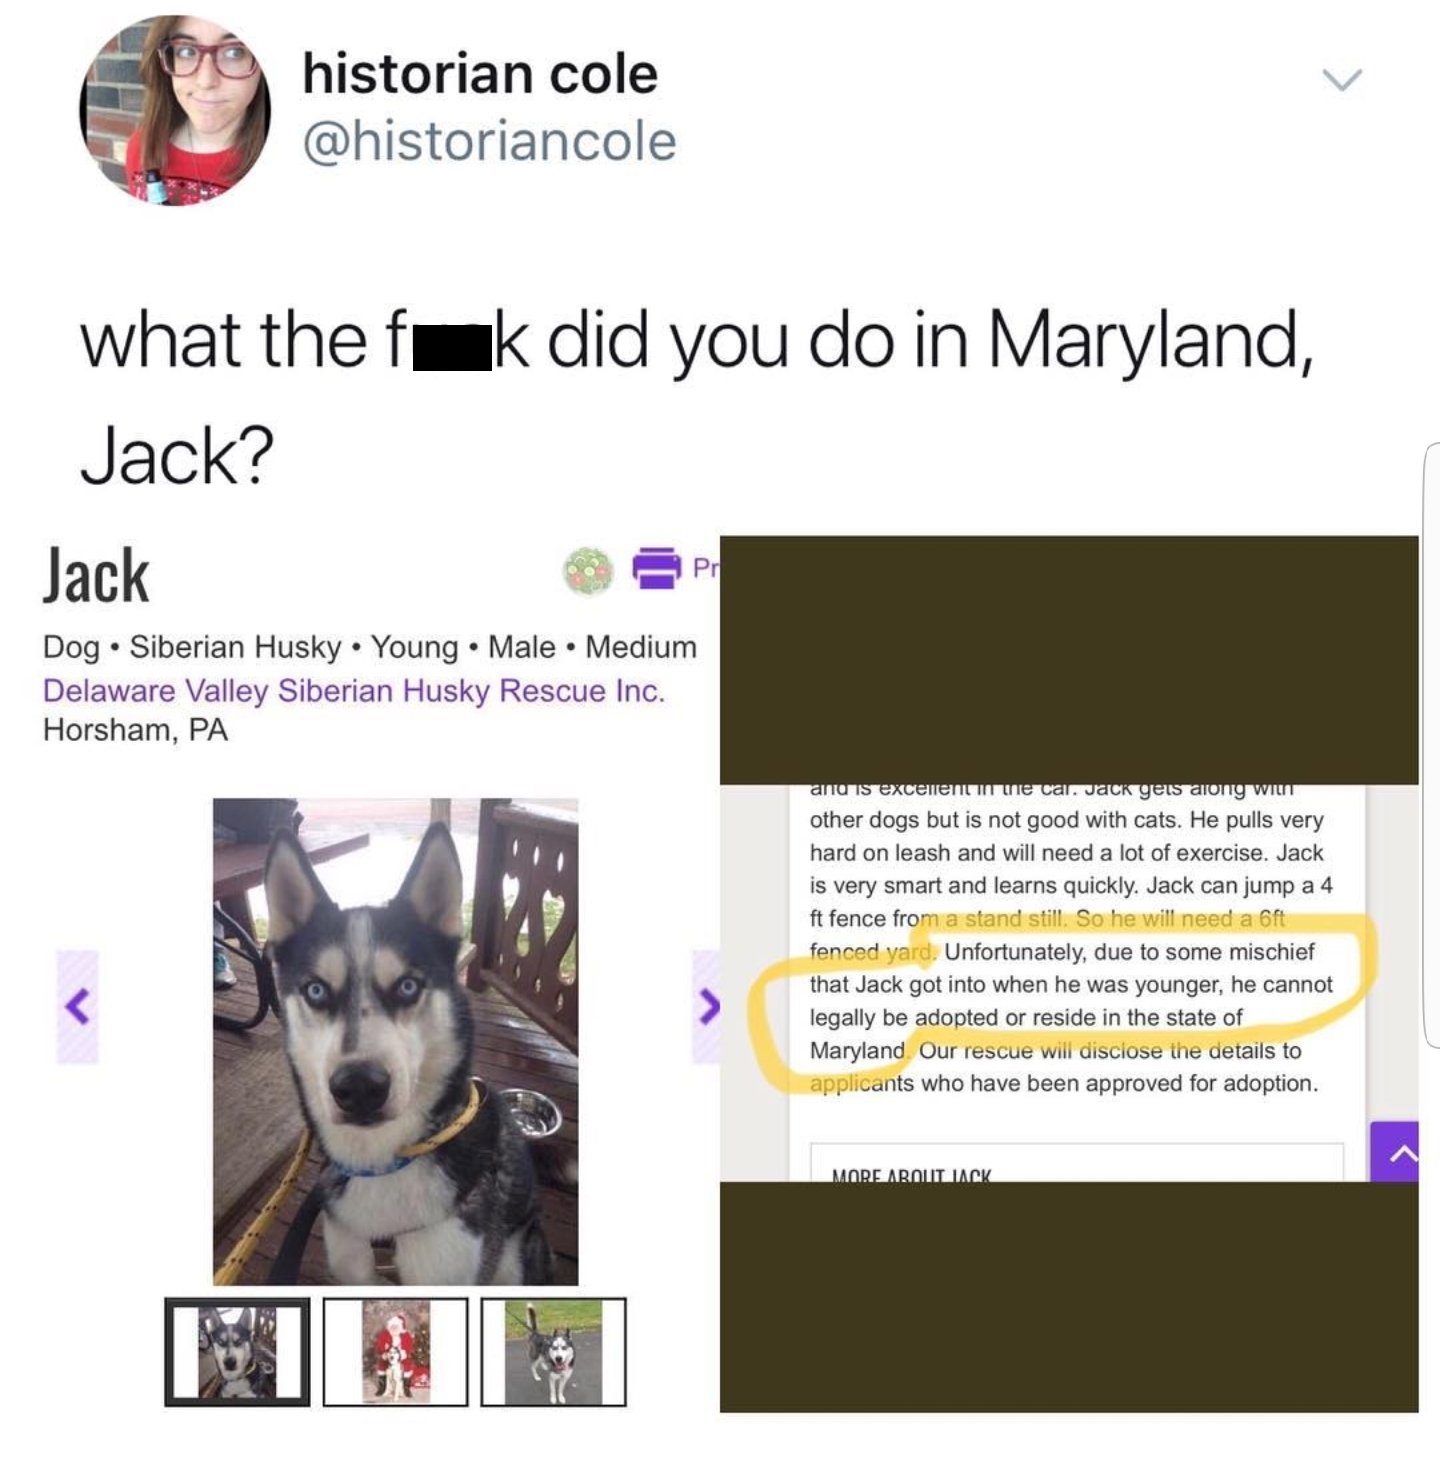 delaware valley siberian rescue inc - historian cole what the fuk did you do in Maryland, Jack? Jack Pr Dog Siberian Husky Young Male Medium Delaware Valley Siberian Husky Rescue Inc. Horsham, Pa and is excellenti e car. Jack gets along Wilt other dogs bu